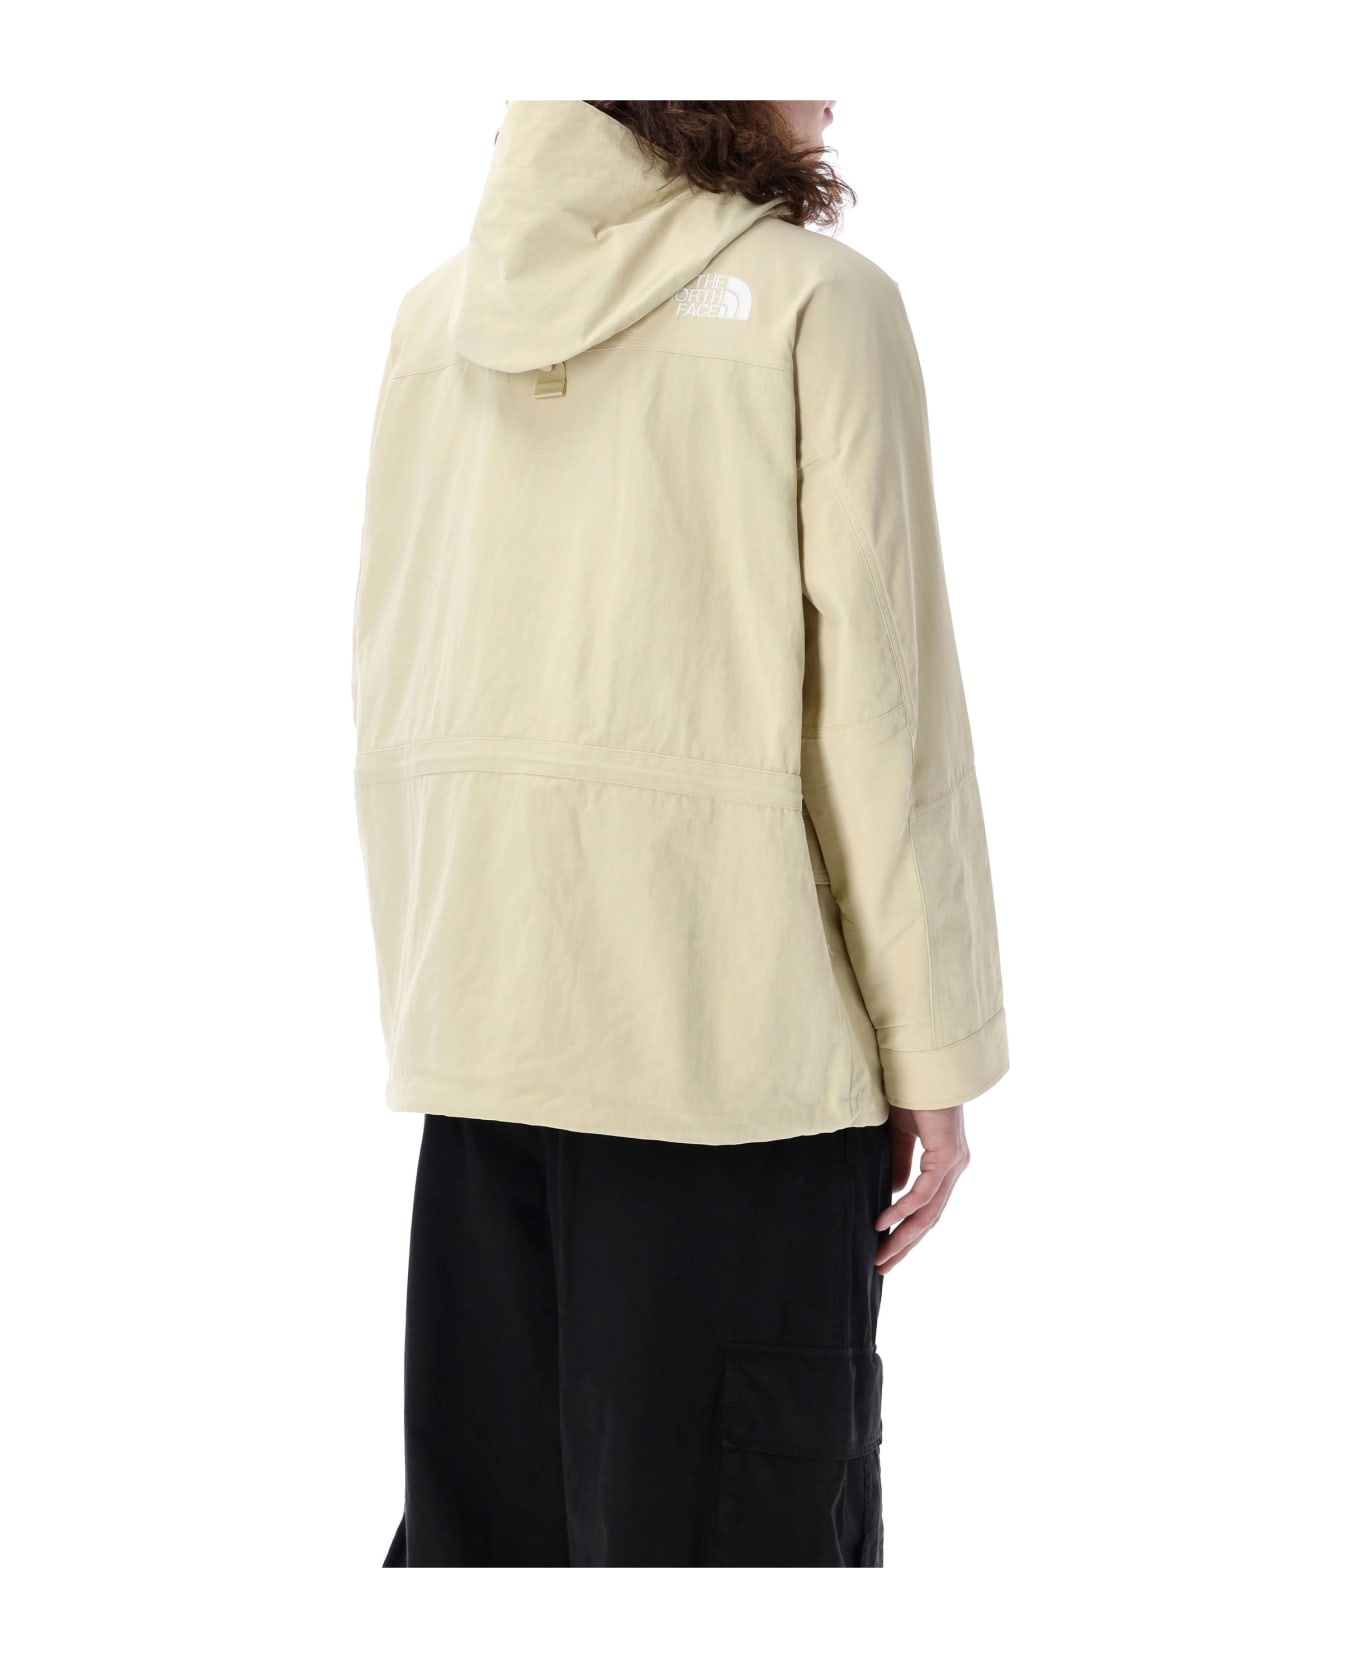 The North Face Ripstop Mountain Cargo Jacket - BEIGE ブレザー